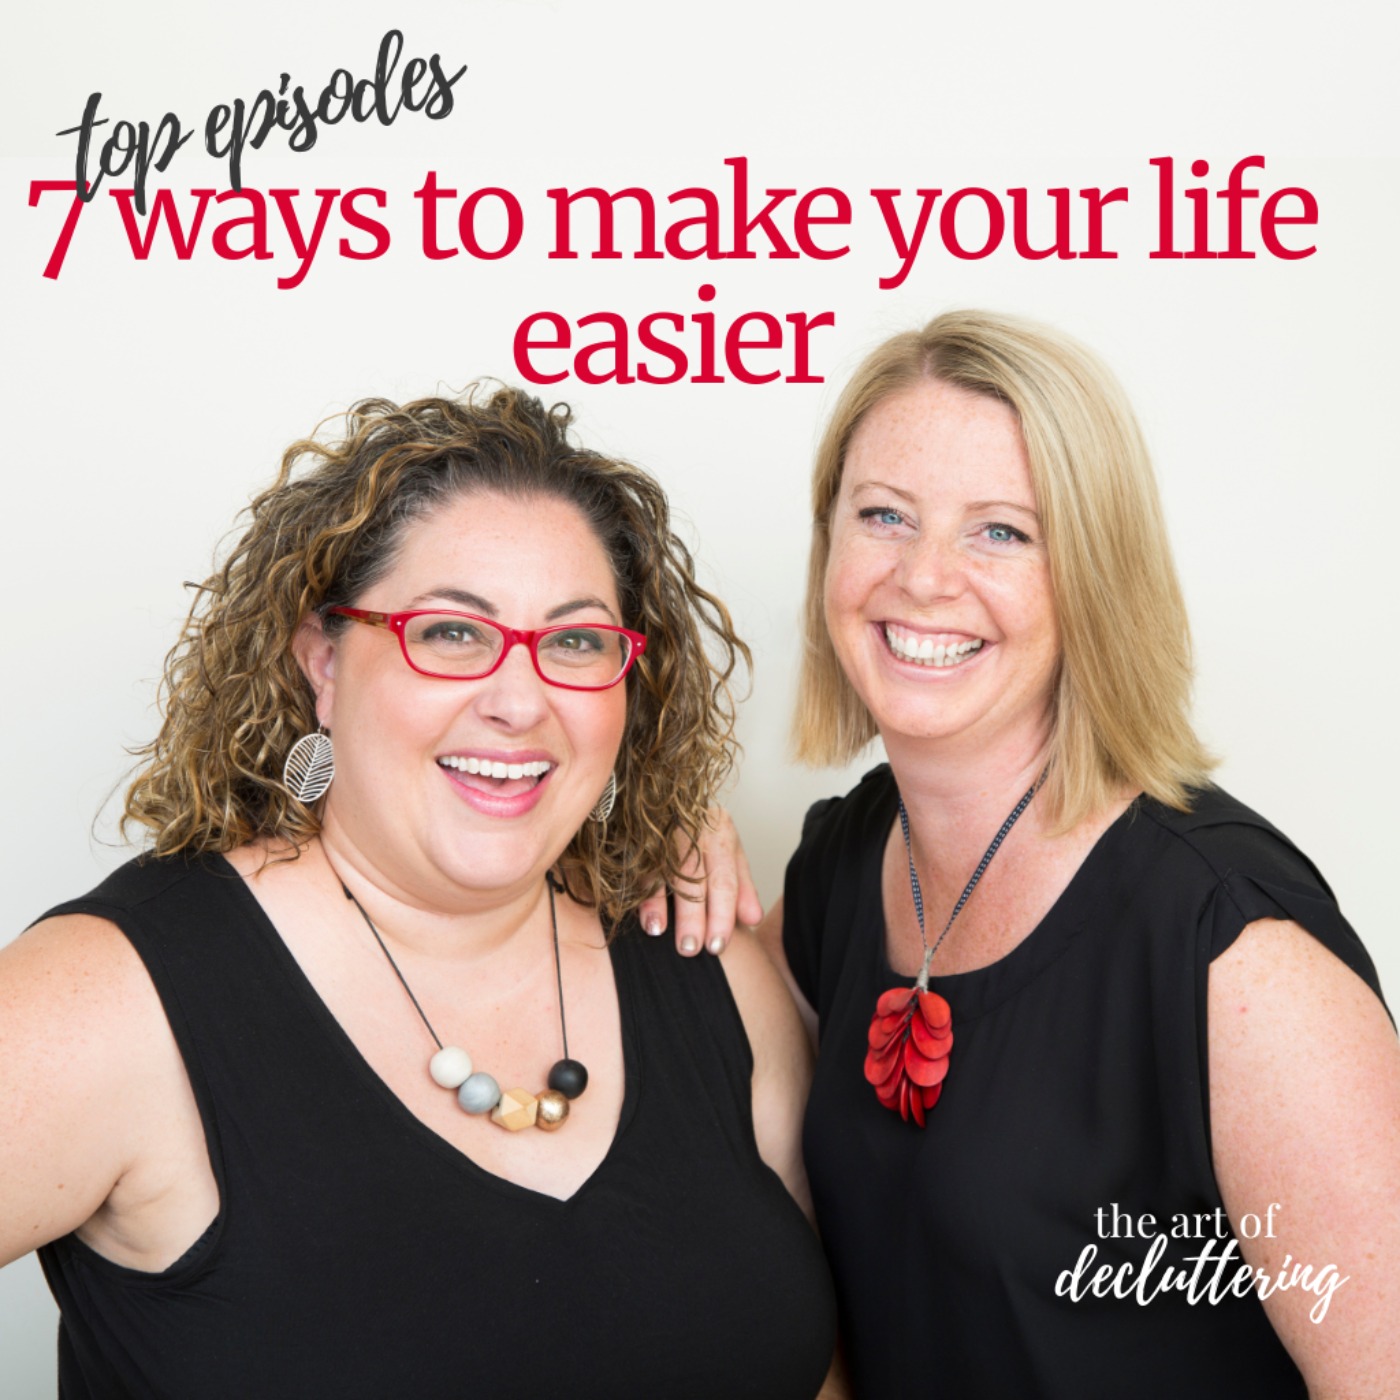 Top Episodes - 7 Ways to Make Your Life Easier